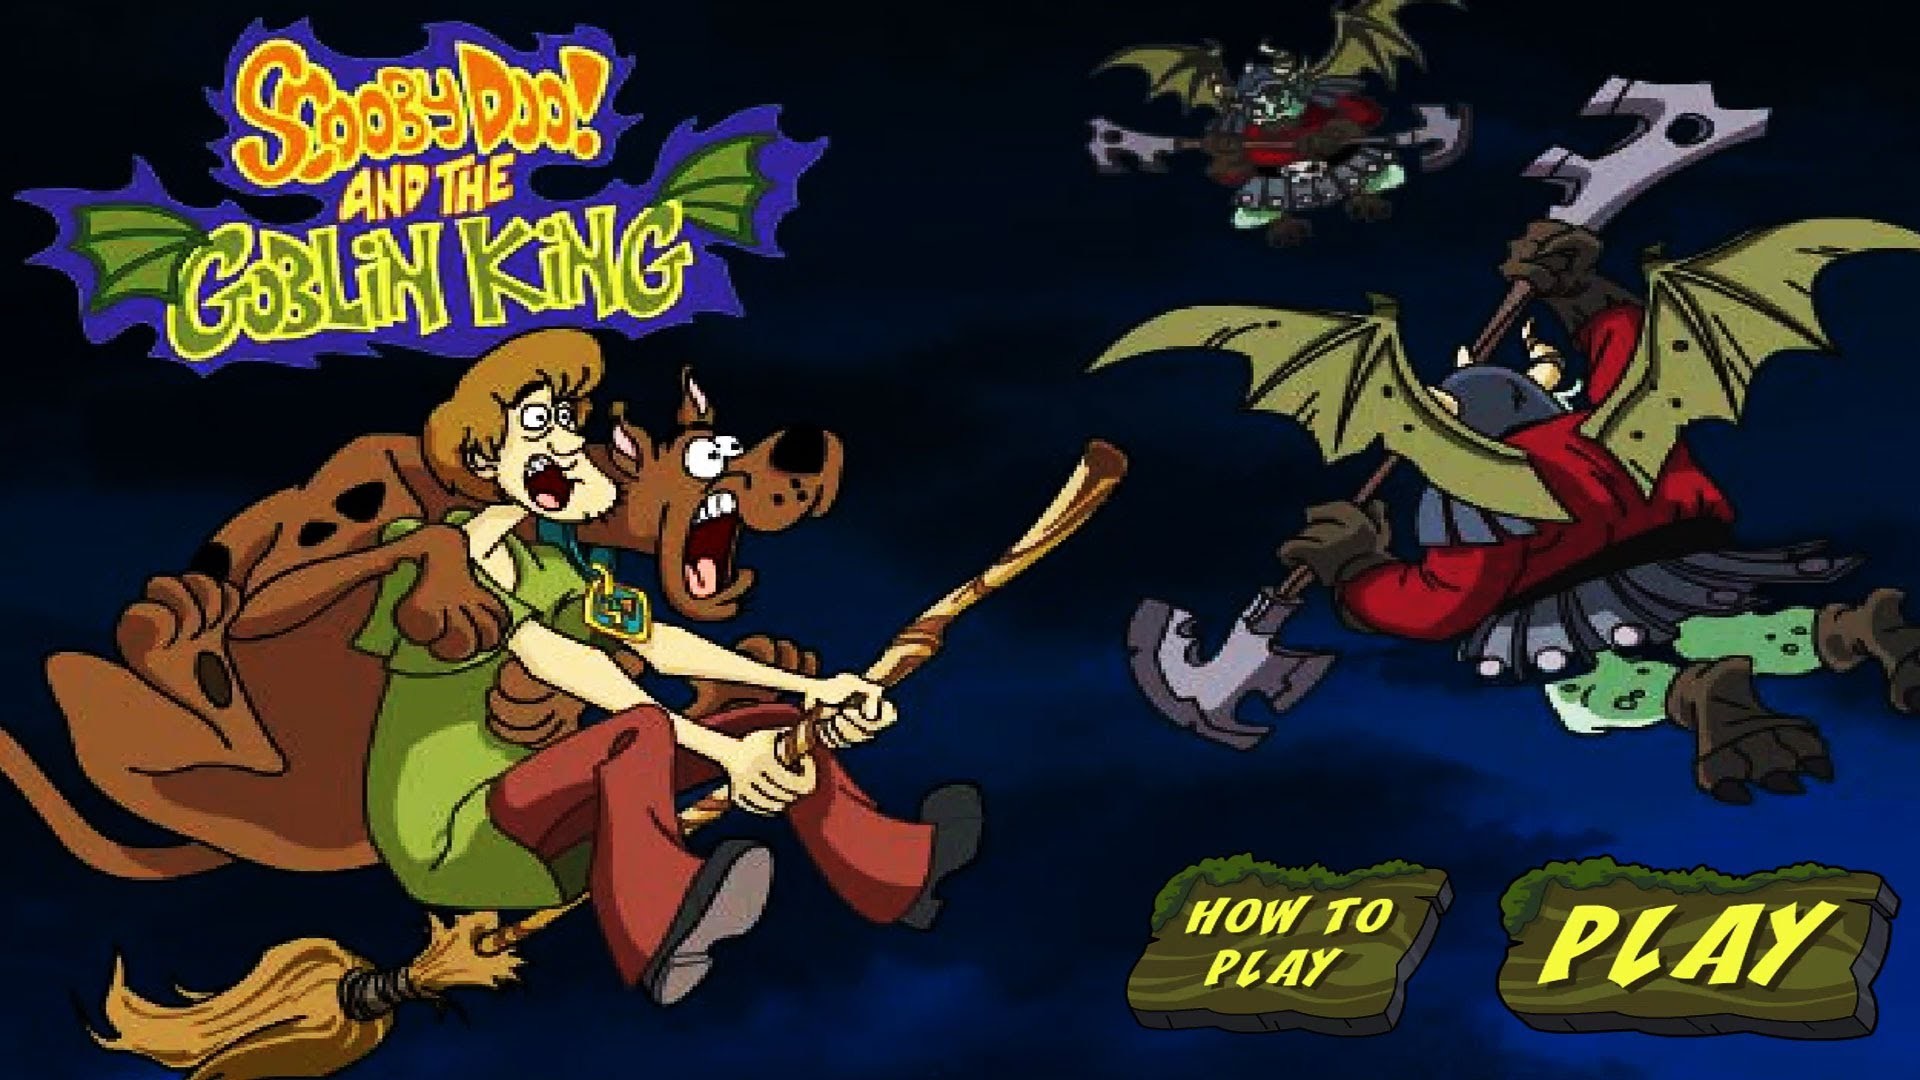 1920x1080 Scooby-Doo And The Goblin King #1